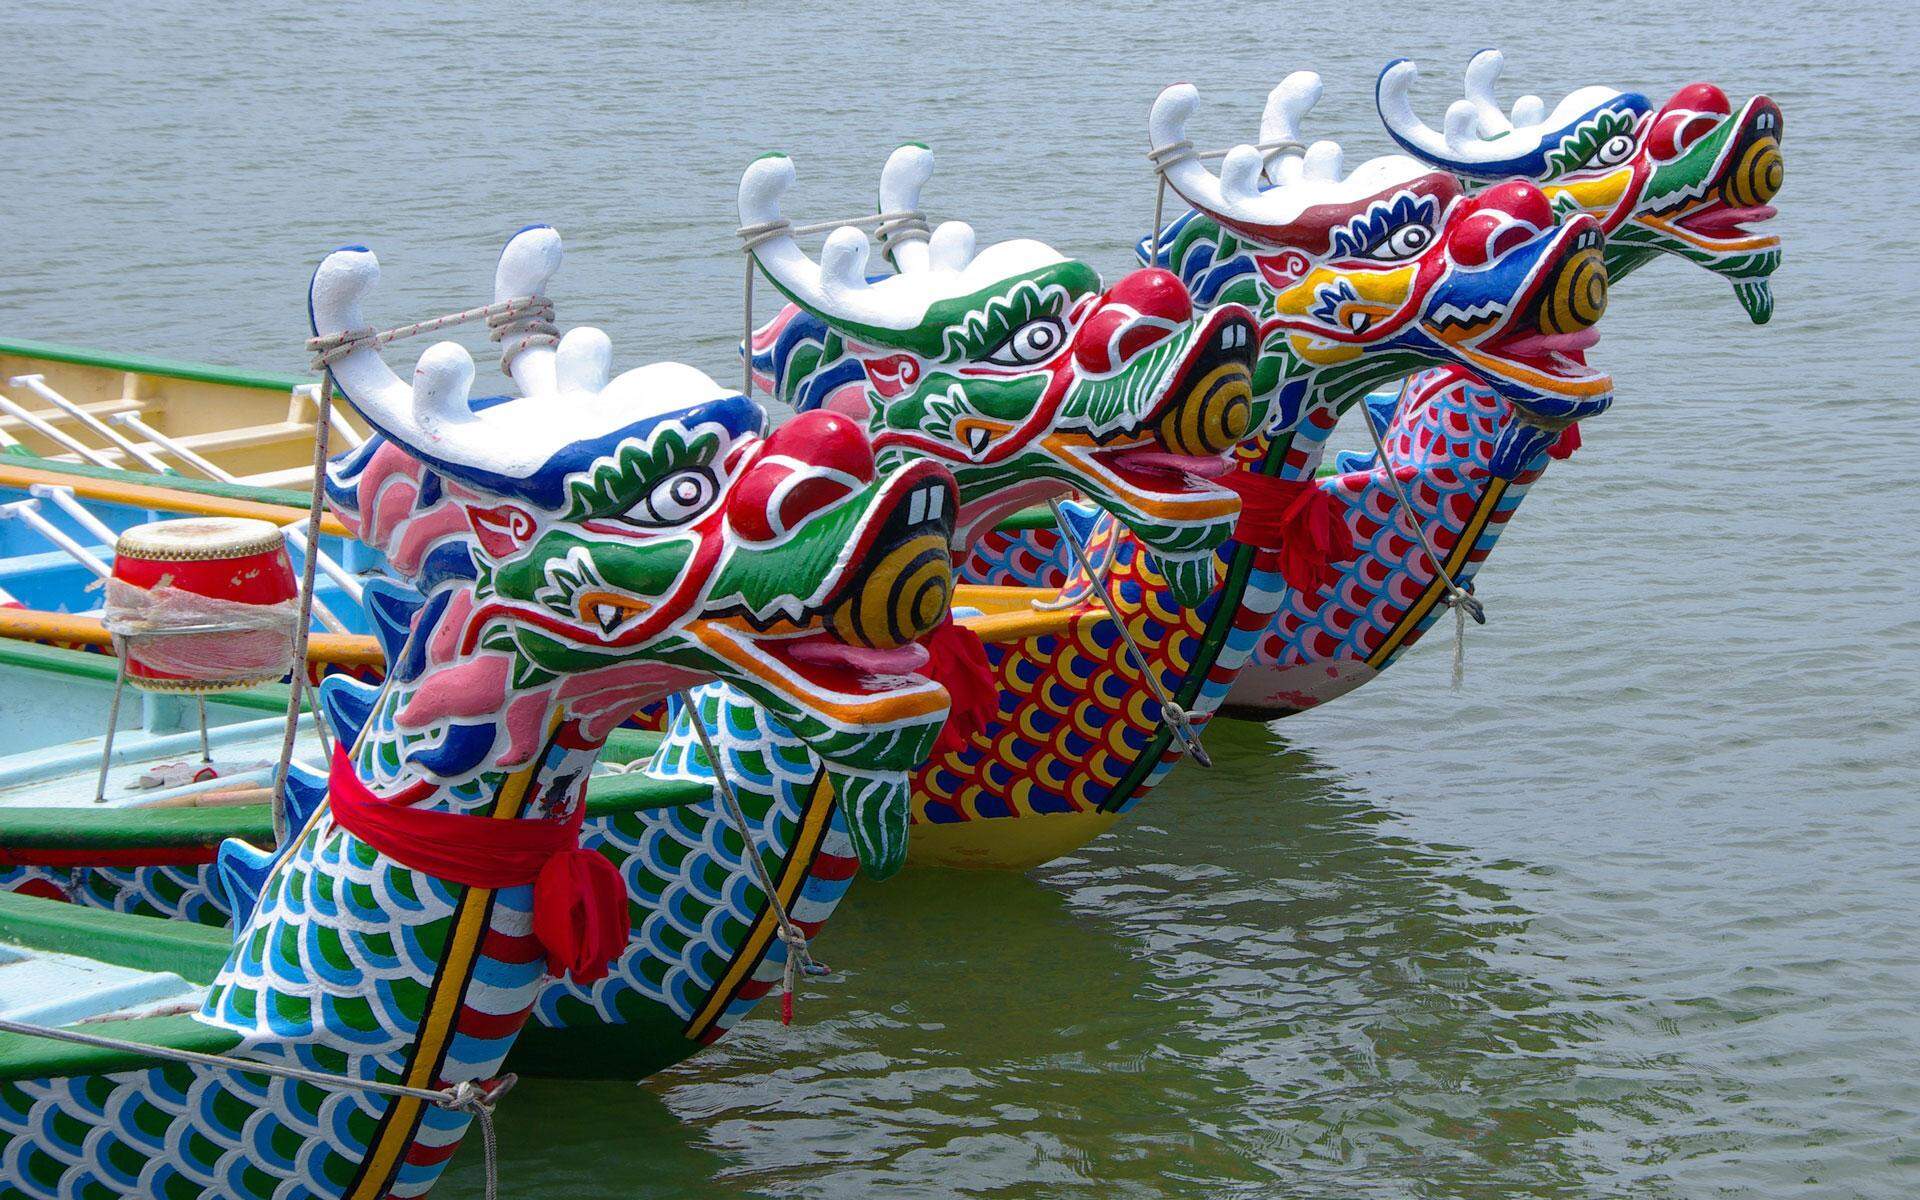 8 Facts About Duanwu Festival (Dragon Boat Festival) - Facts.net